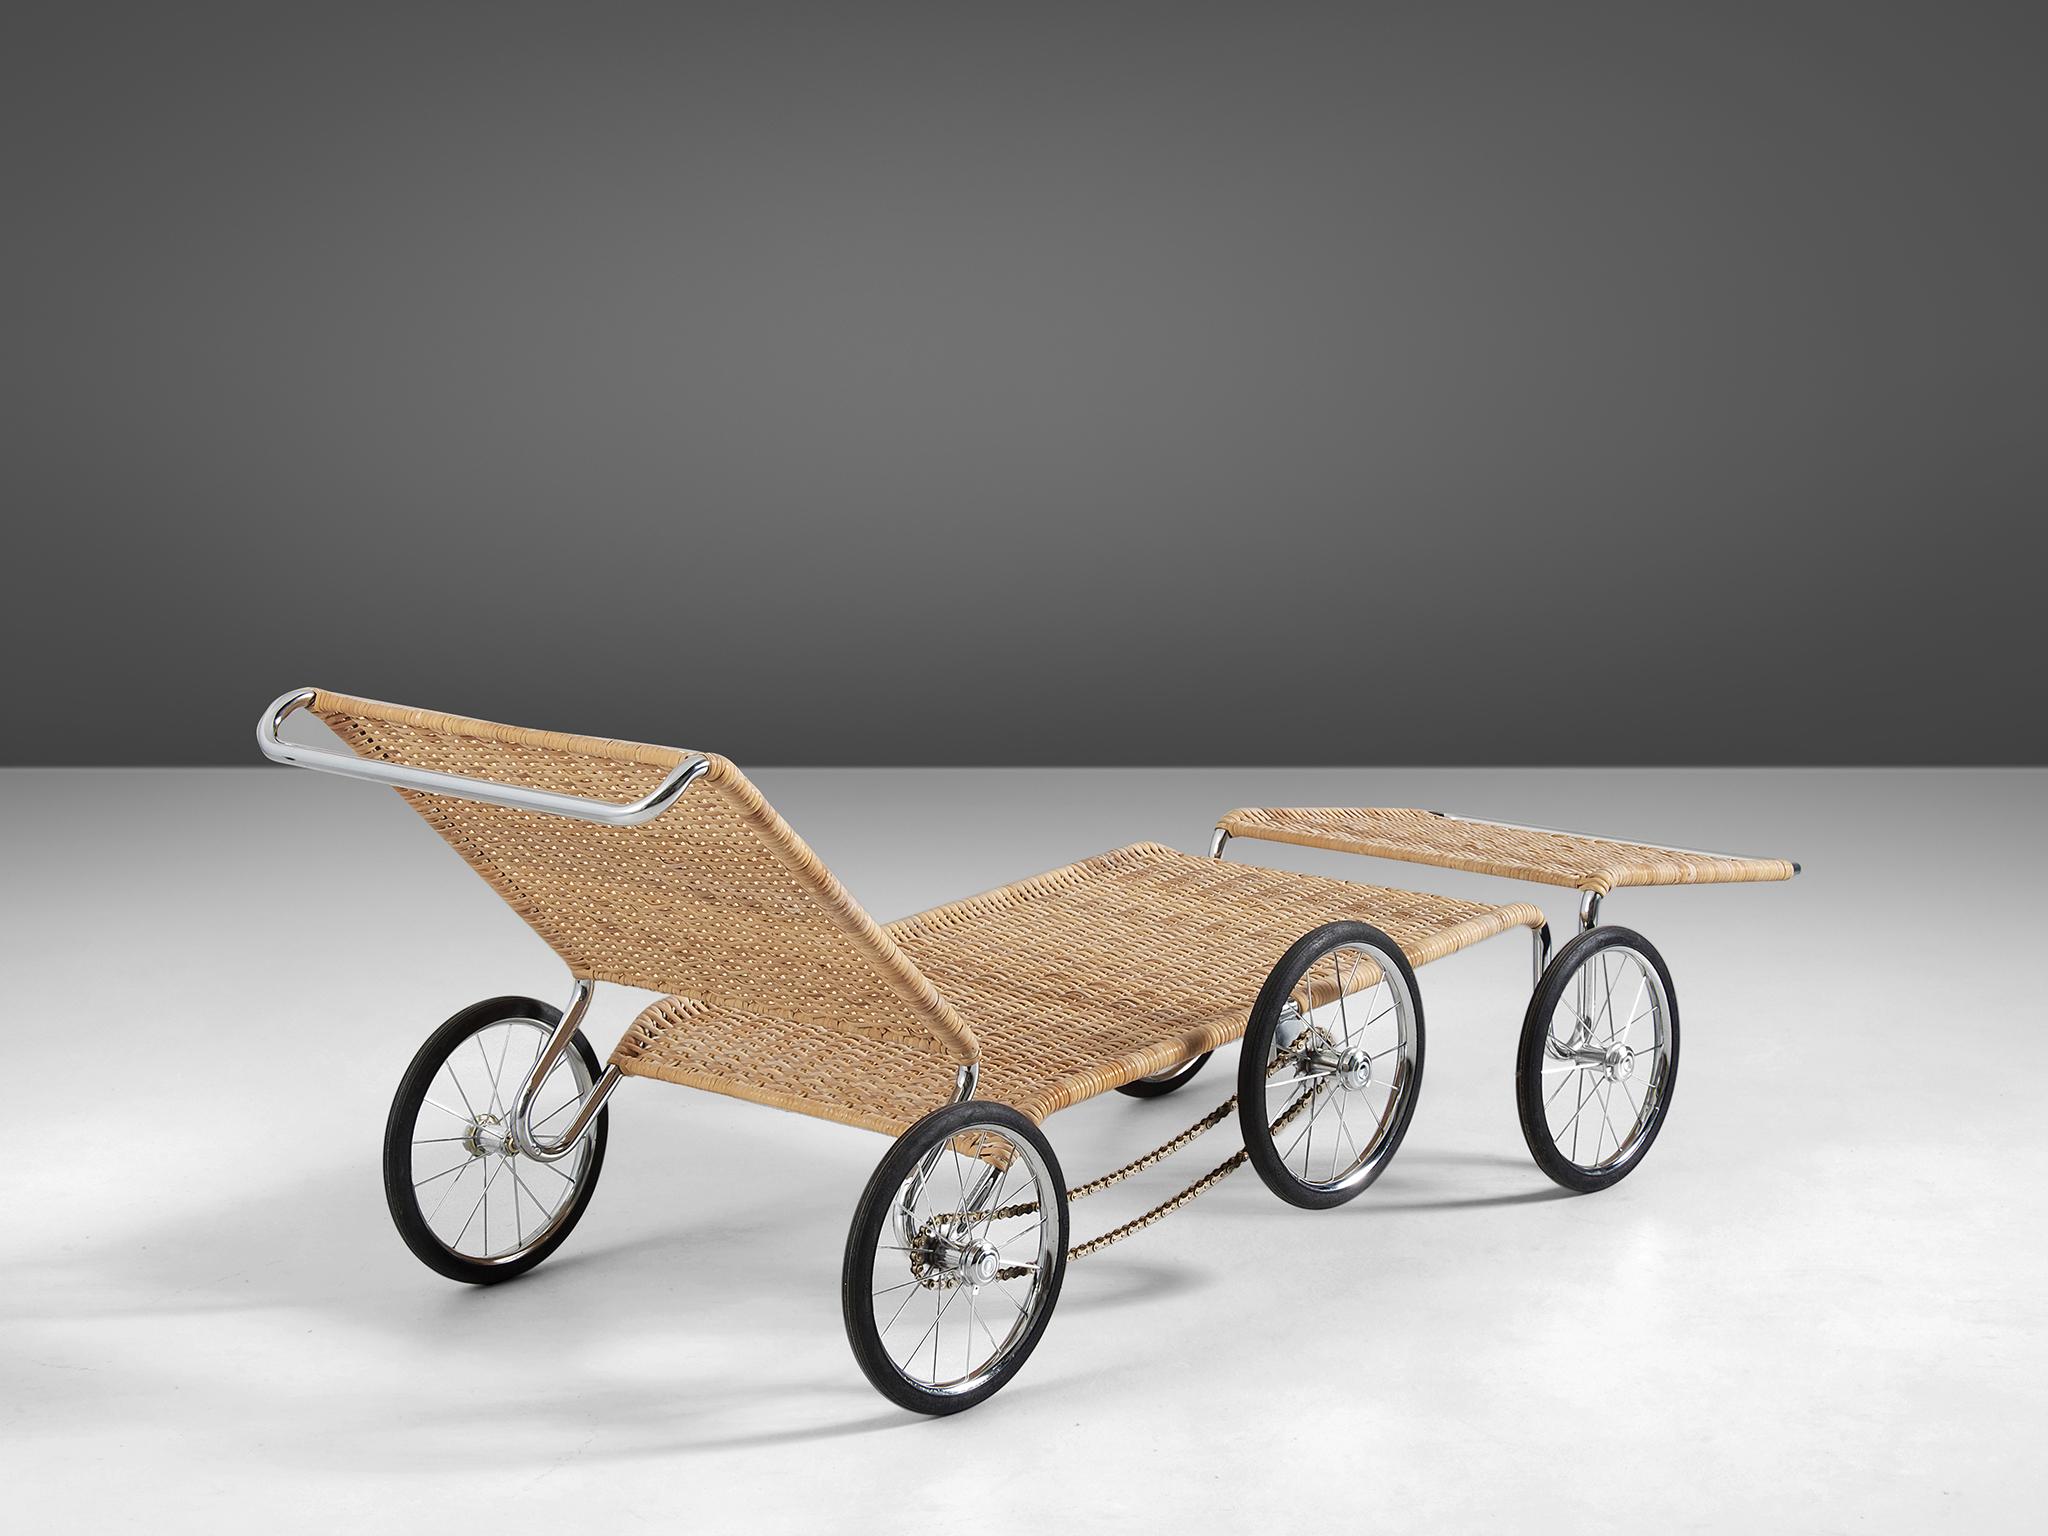 Daybed F41E, steel and wicker by Marcel Breuer for Tecta, Germany, 1980s.

The design of the F41 lounge on wheels dates from 1928. It was one of the early designs from Marcel Breuer. For his tubular chairs, Breuer drew inspiration from a bicycle. In